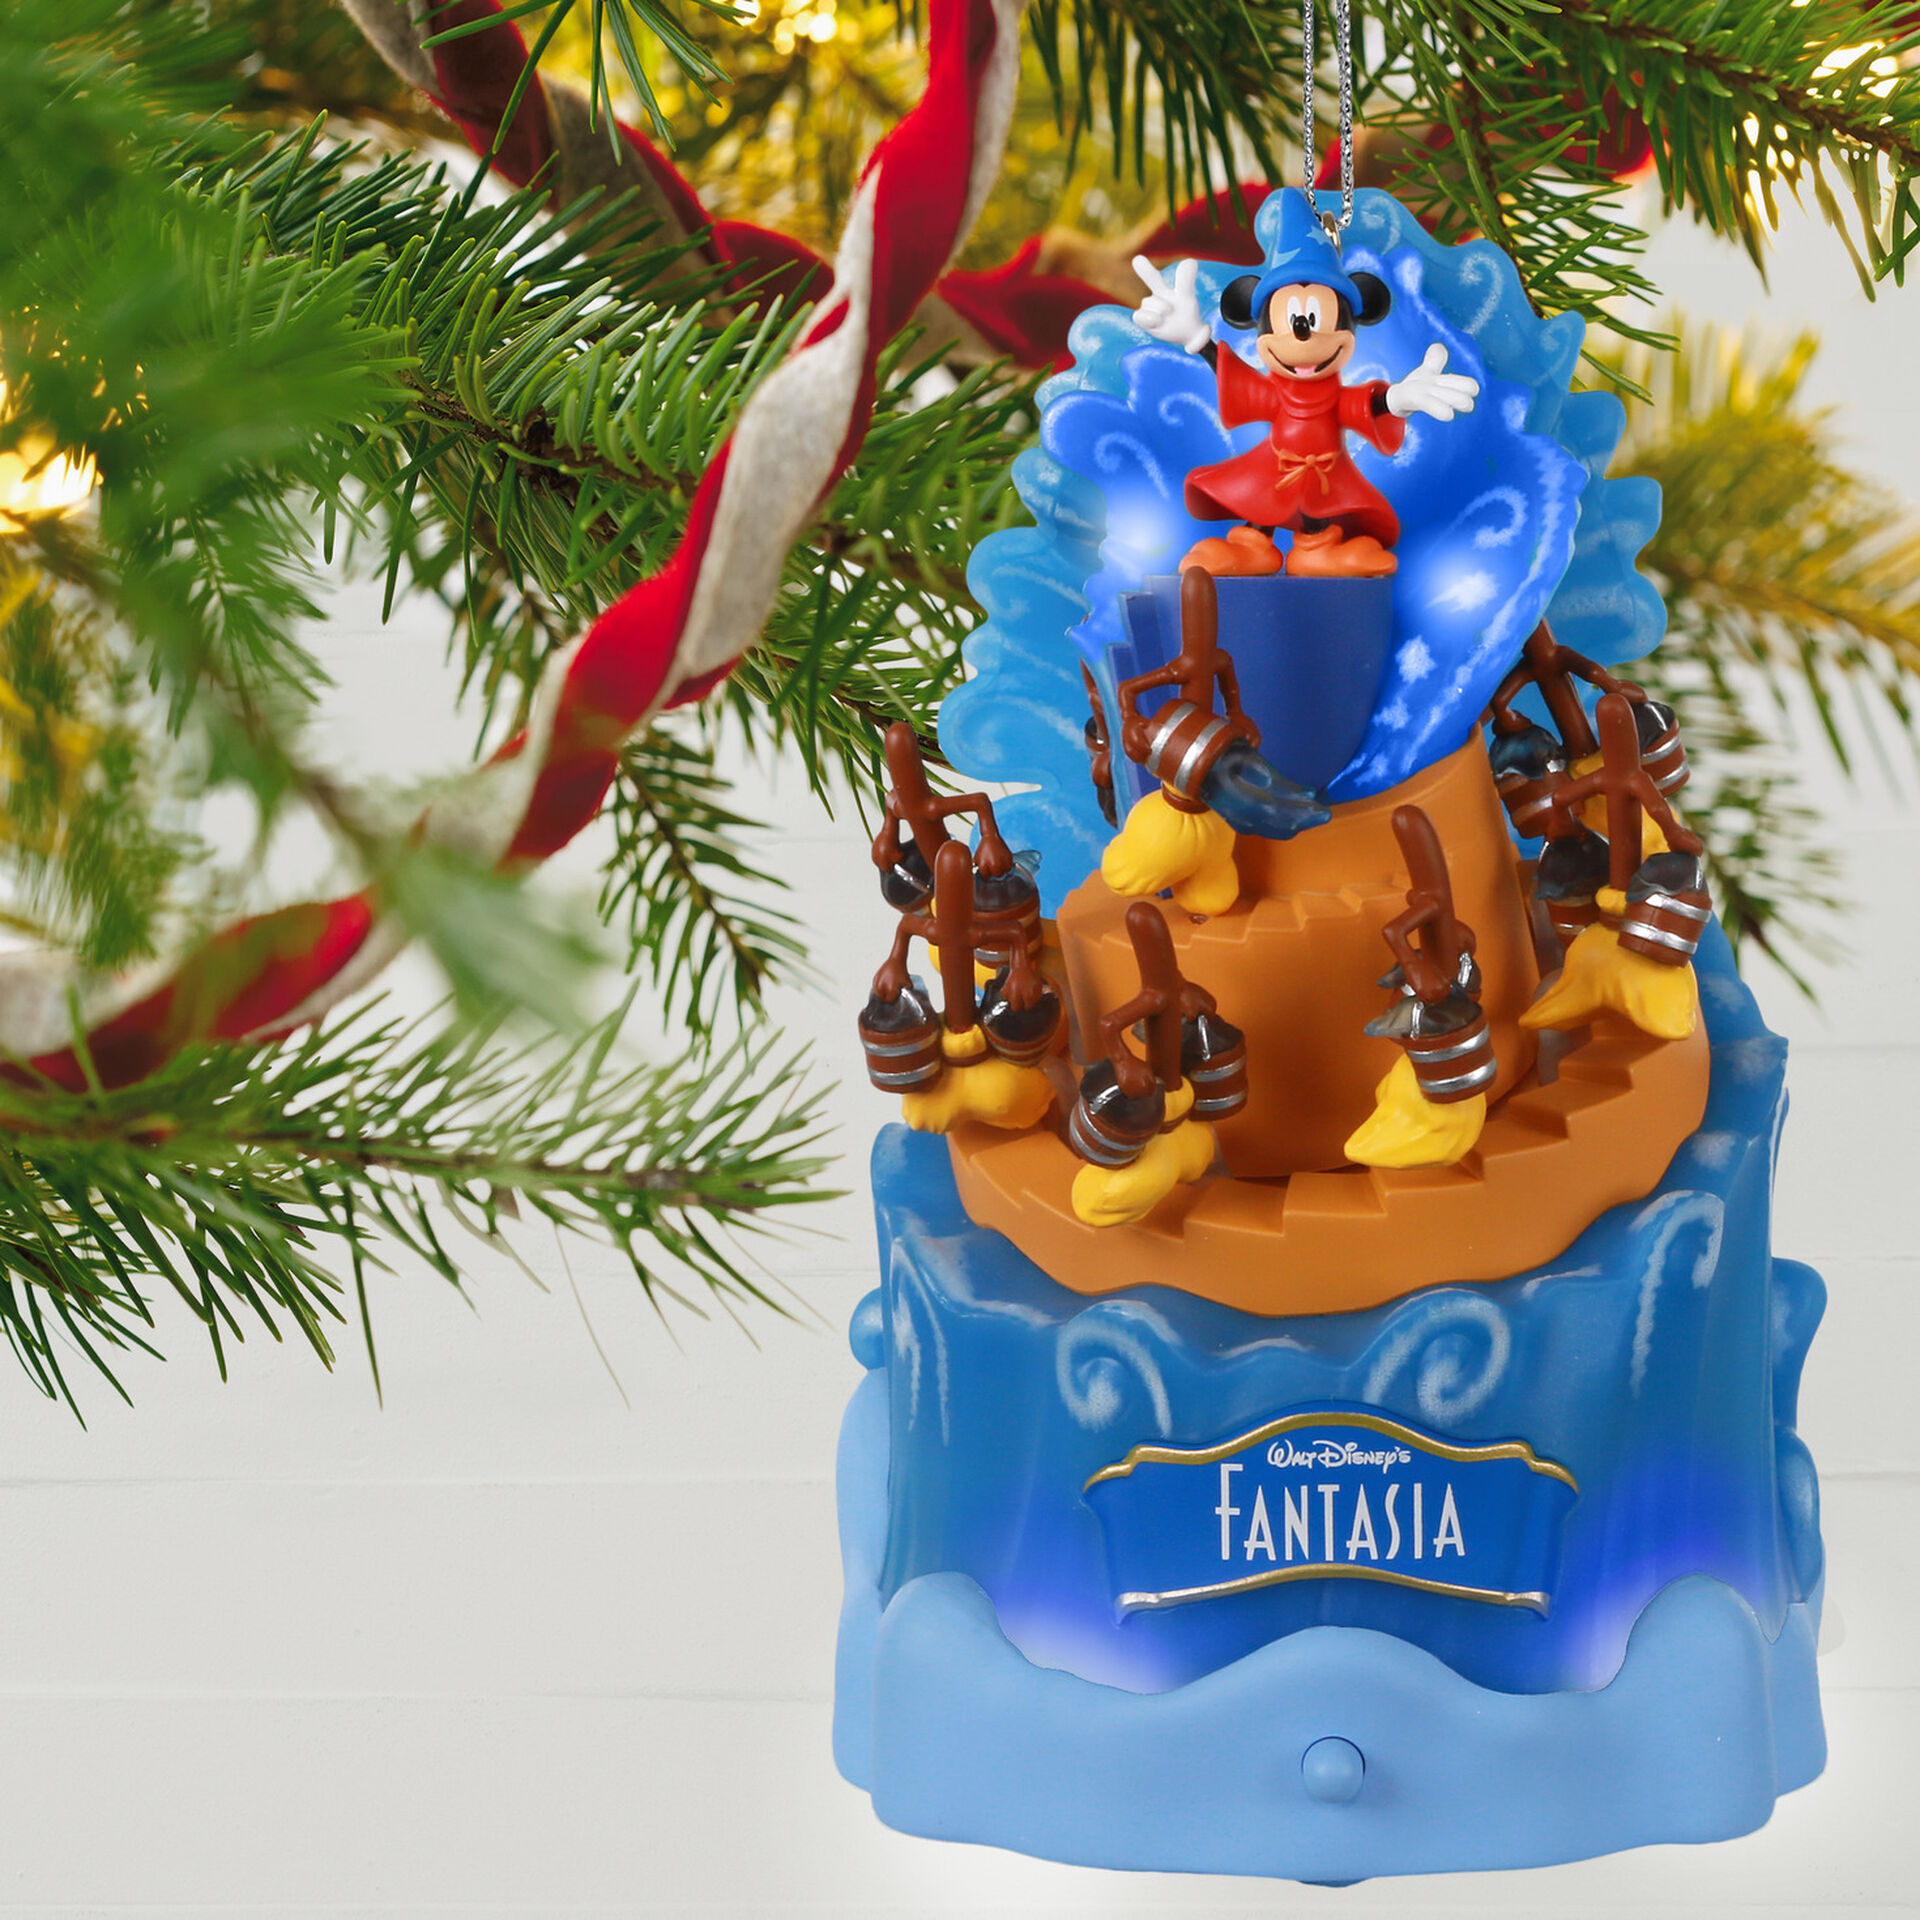 We Found Two Awesome MUSICAL Disney Ornaments That You Have to See